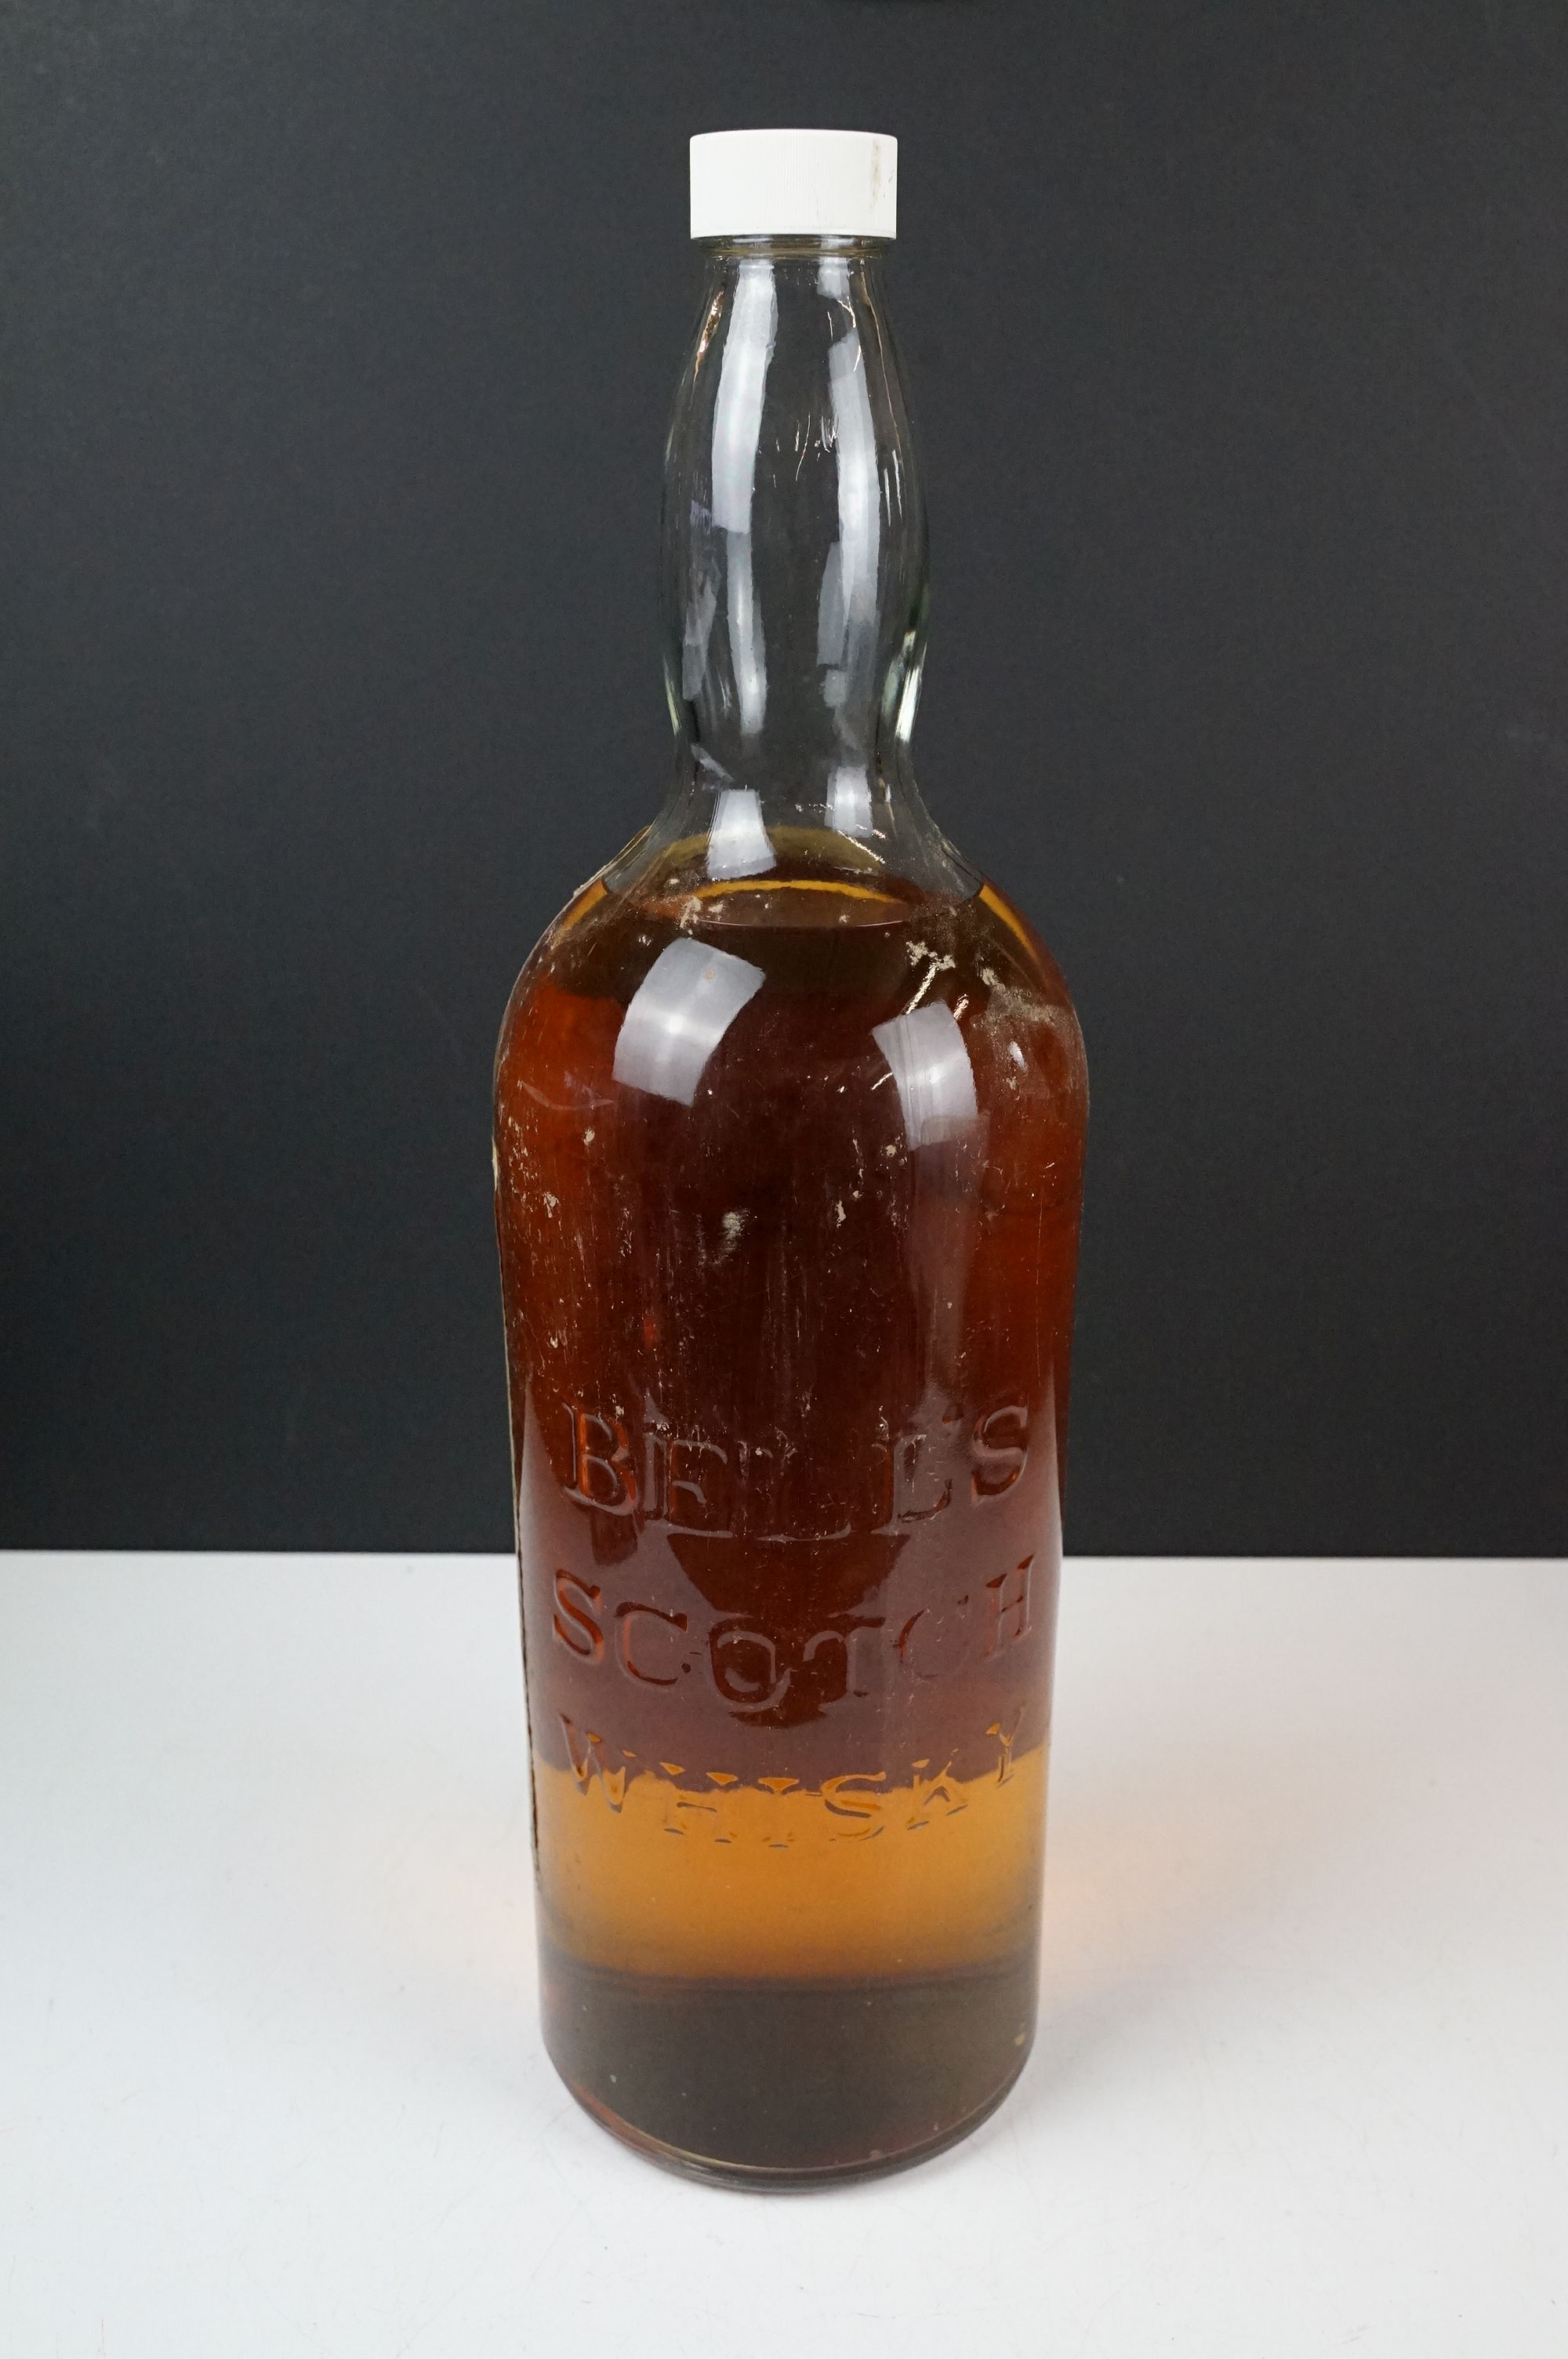 Bell's Old Scotch Whisky extra special 8 pints bottle. 70% proof. - Image 4 of 4